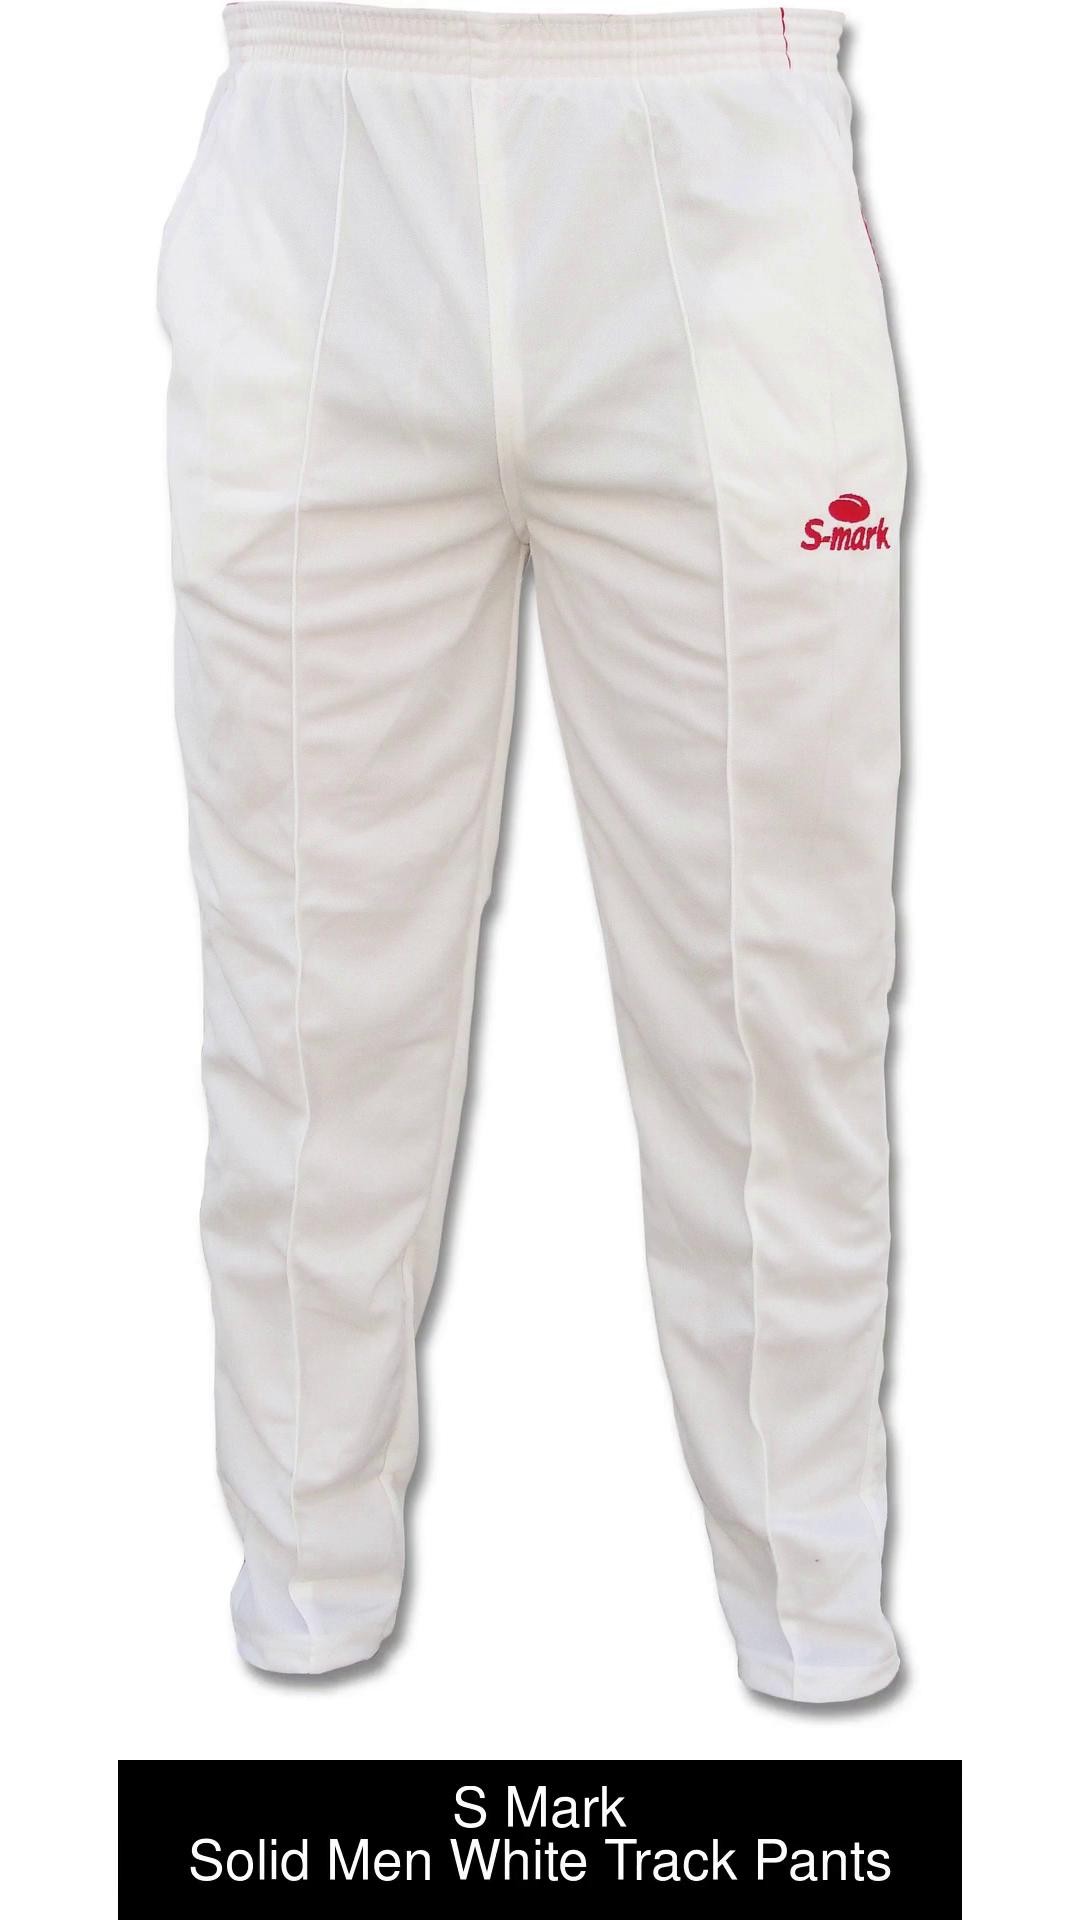 Shrey Premium Cricket Navy Coloured Trouser Size Buy Online India  Cricket  Clothing Kit  Whites  See Price Photos  Features  Specialist Cricket  Shop India